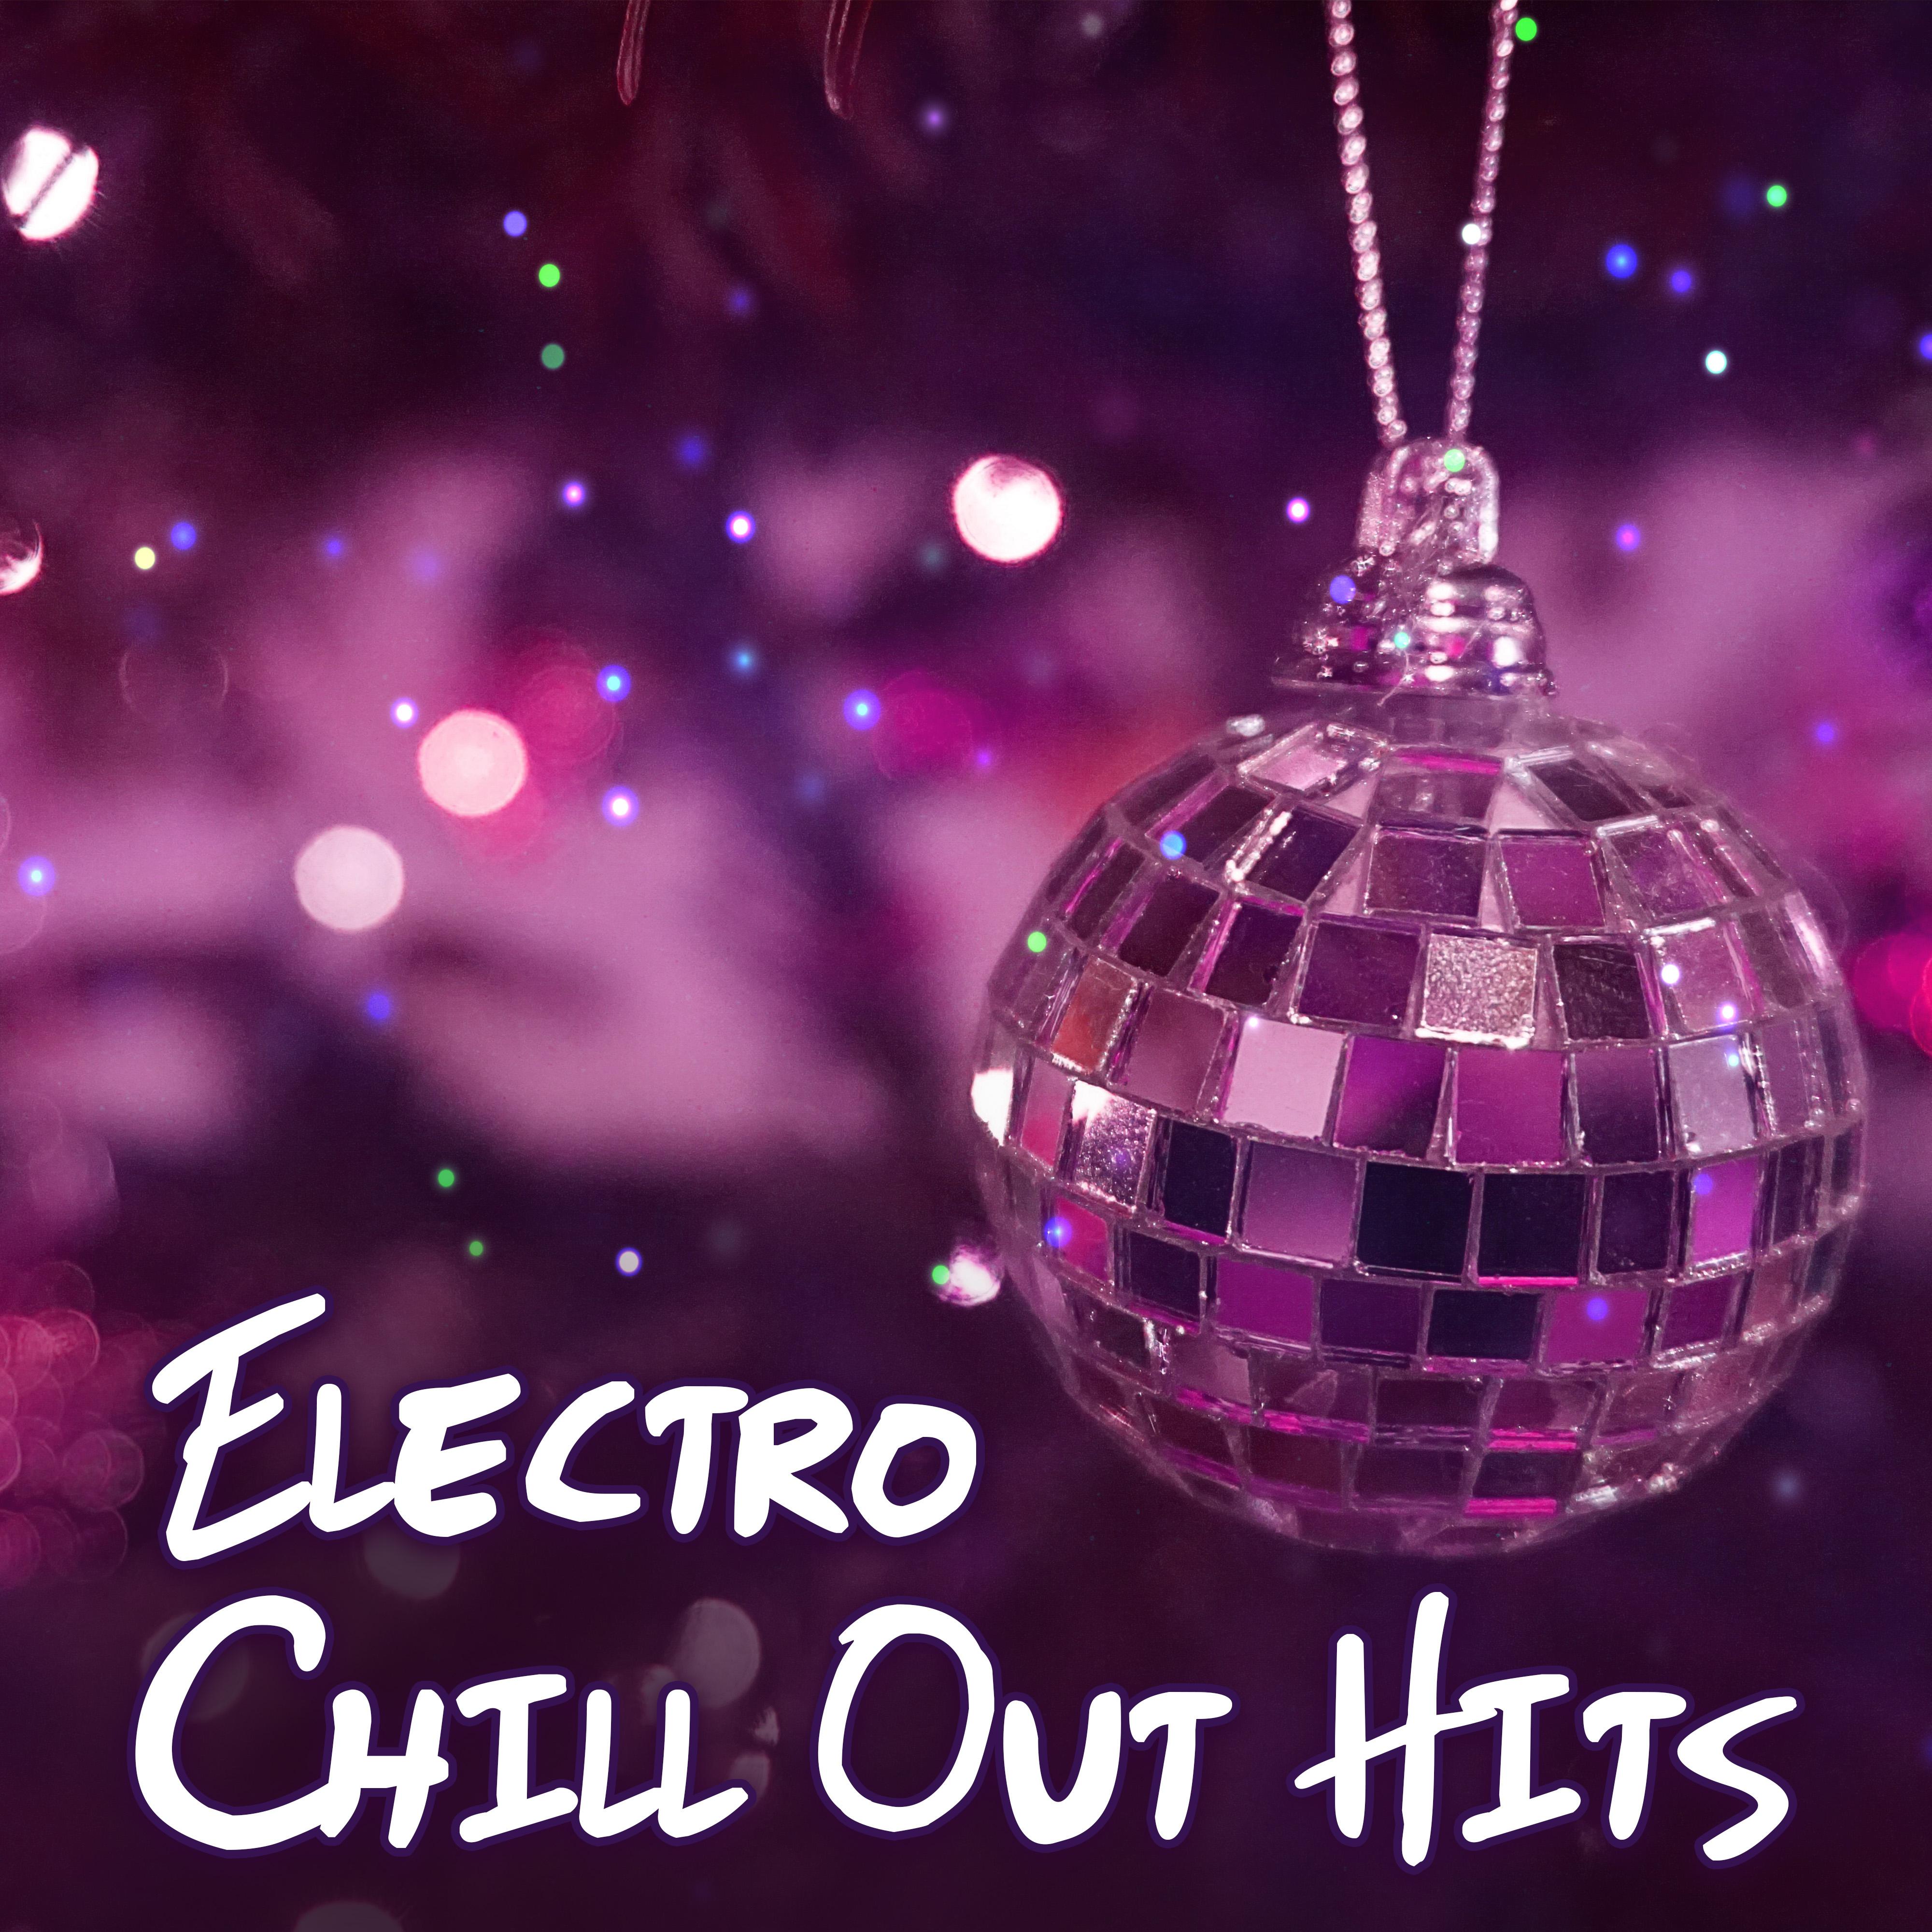 Electro Chill Out Hits – Deep Chill Out, New Chill Out Beats, Summer Music, Relax